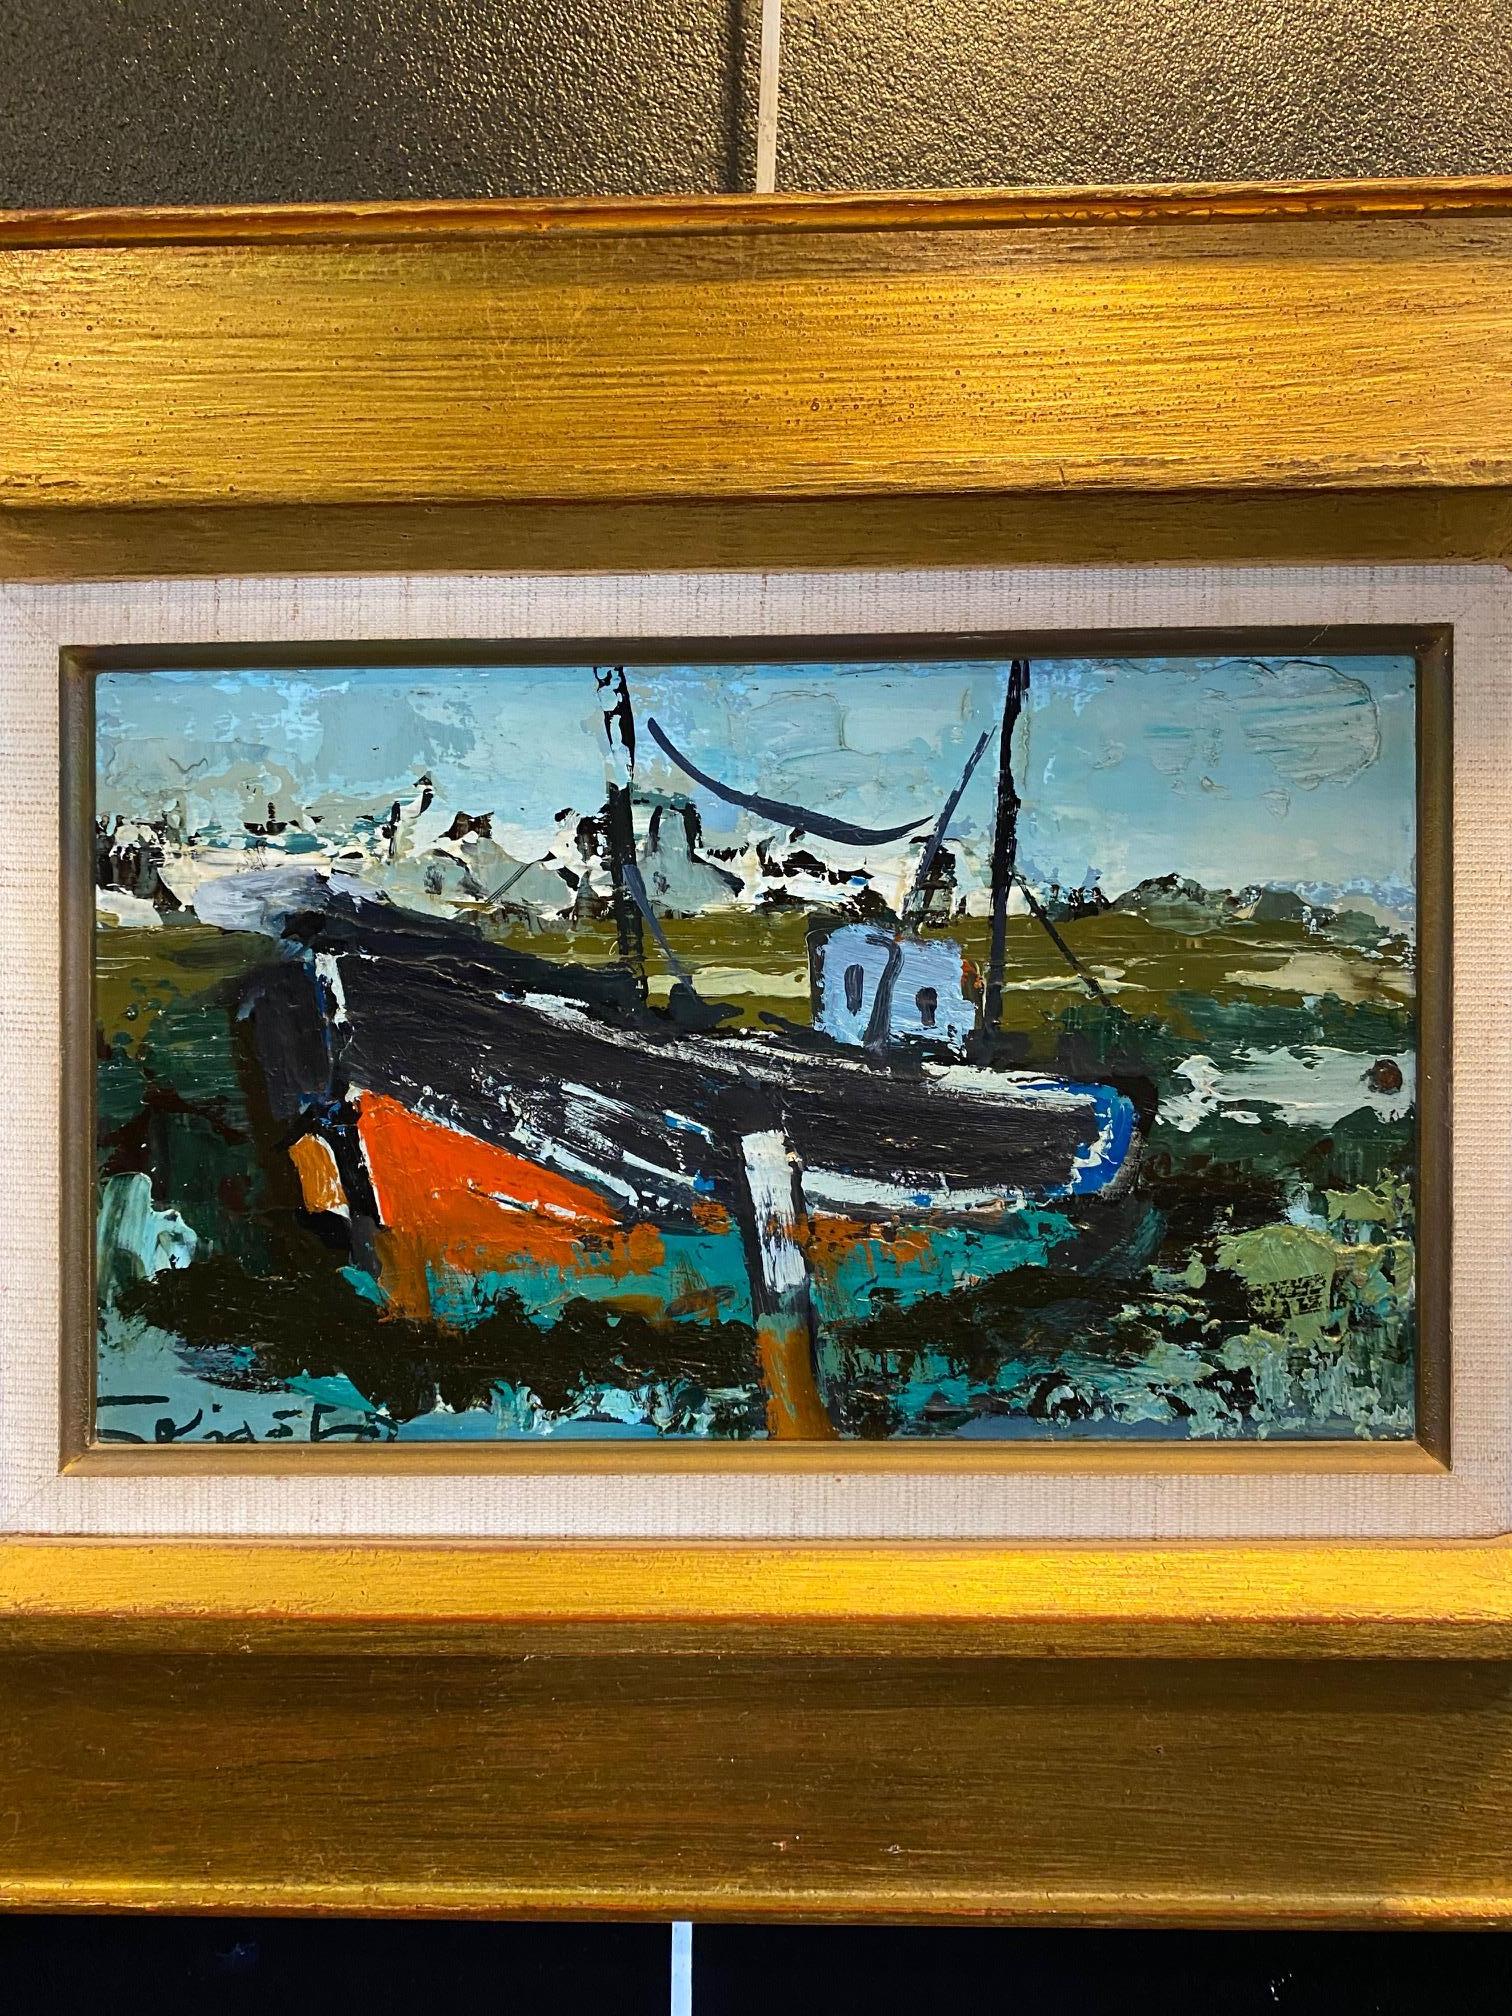 William Goliasch (1922-1986)
Geneva Artist 
Oil work on canvas with frame
Total size with frame is 45x34 cm